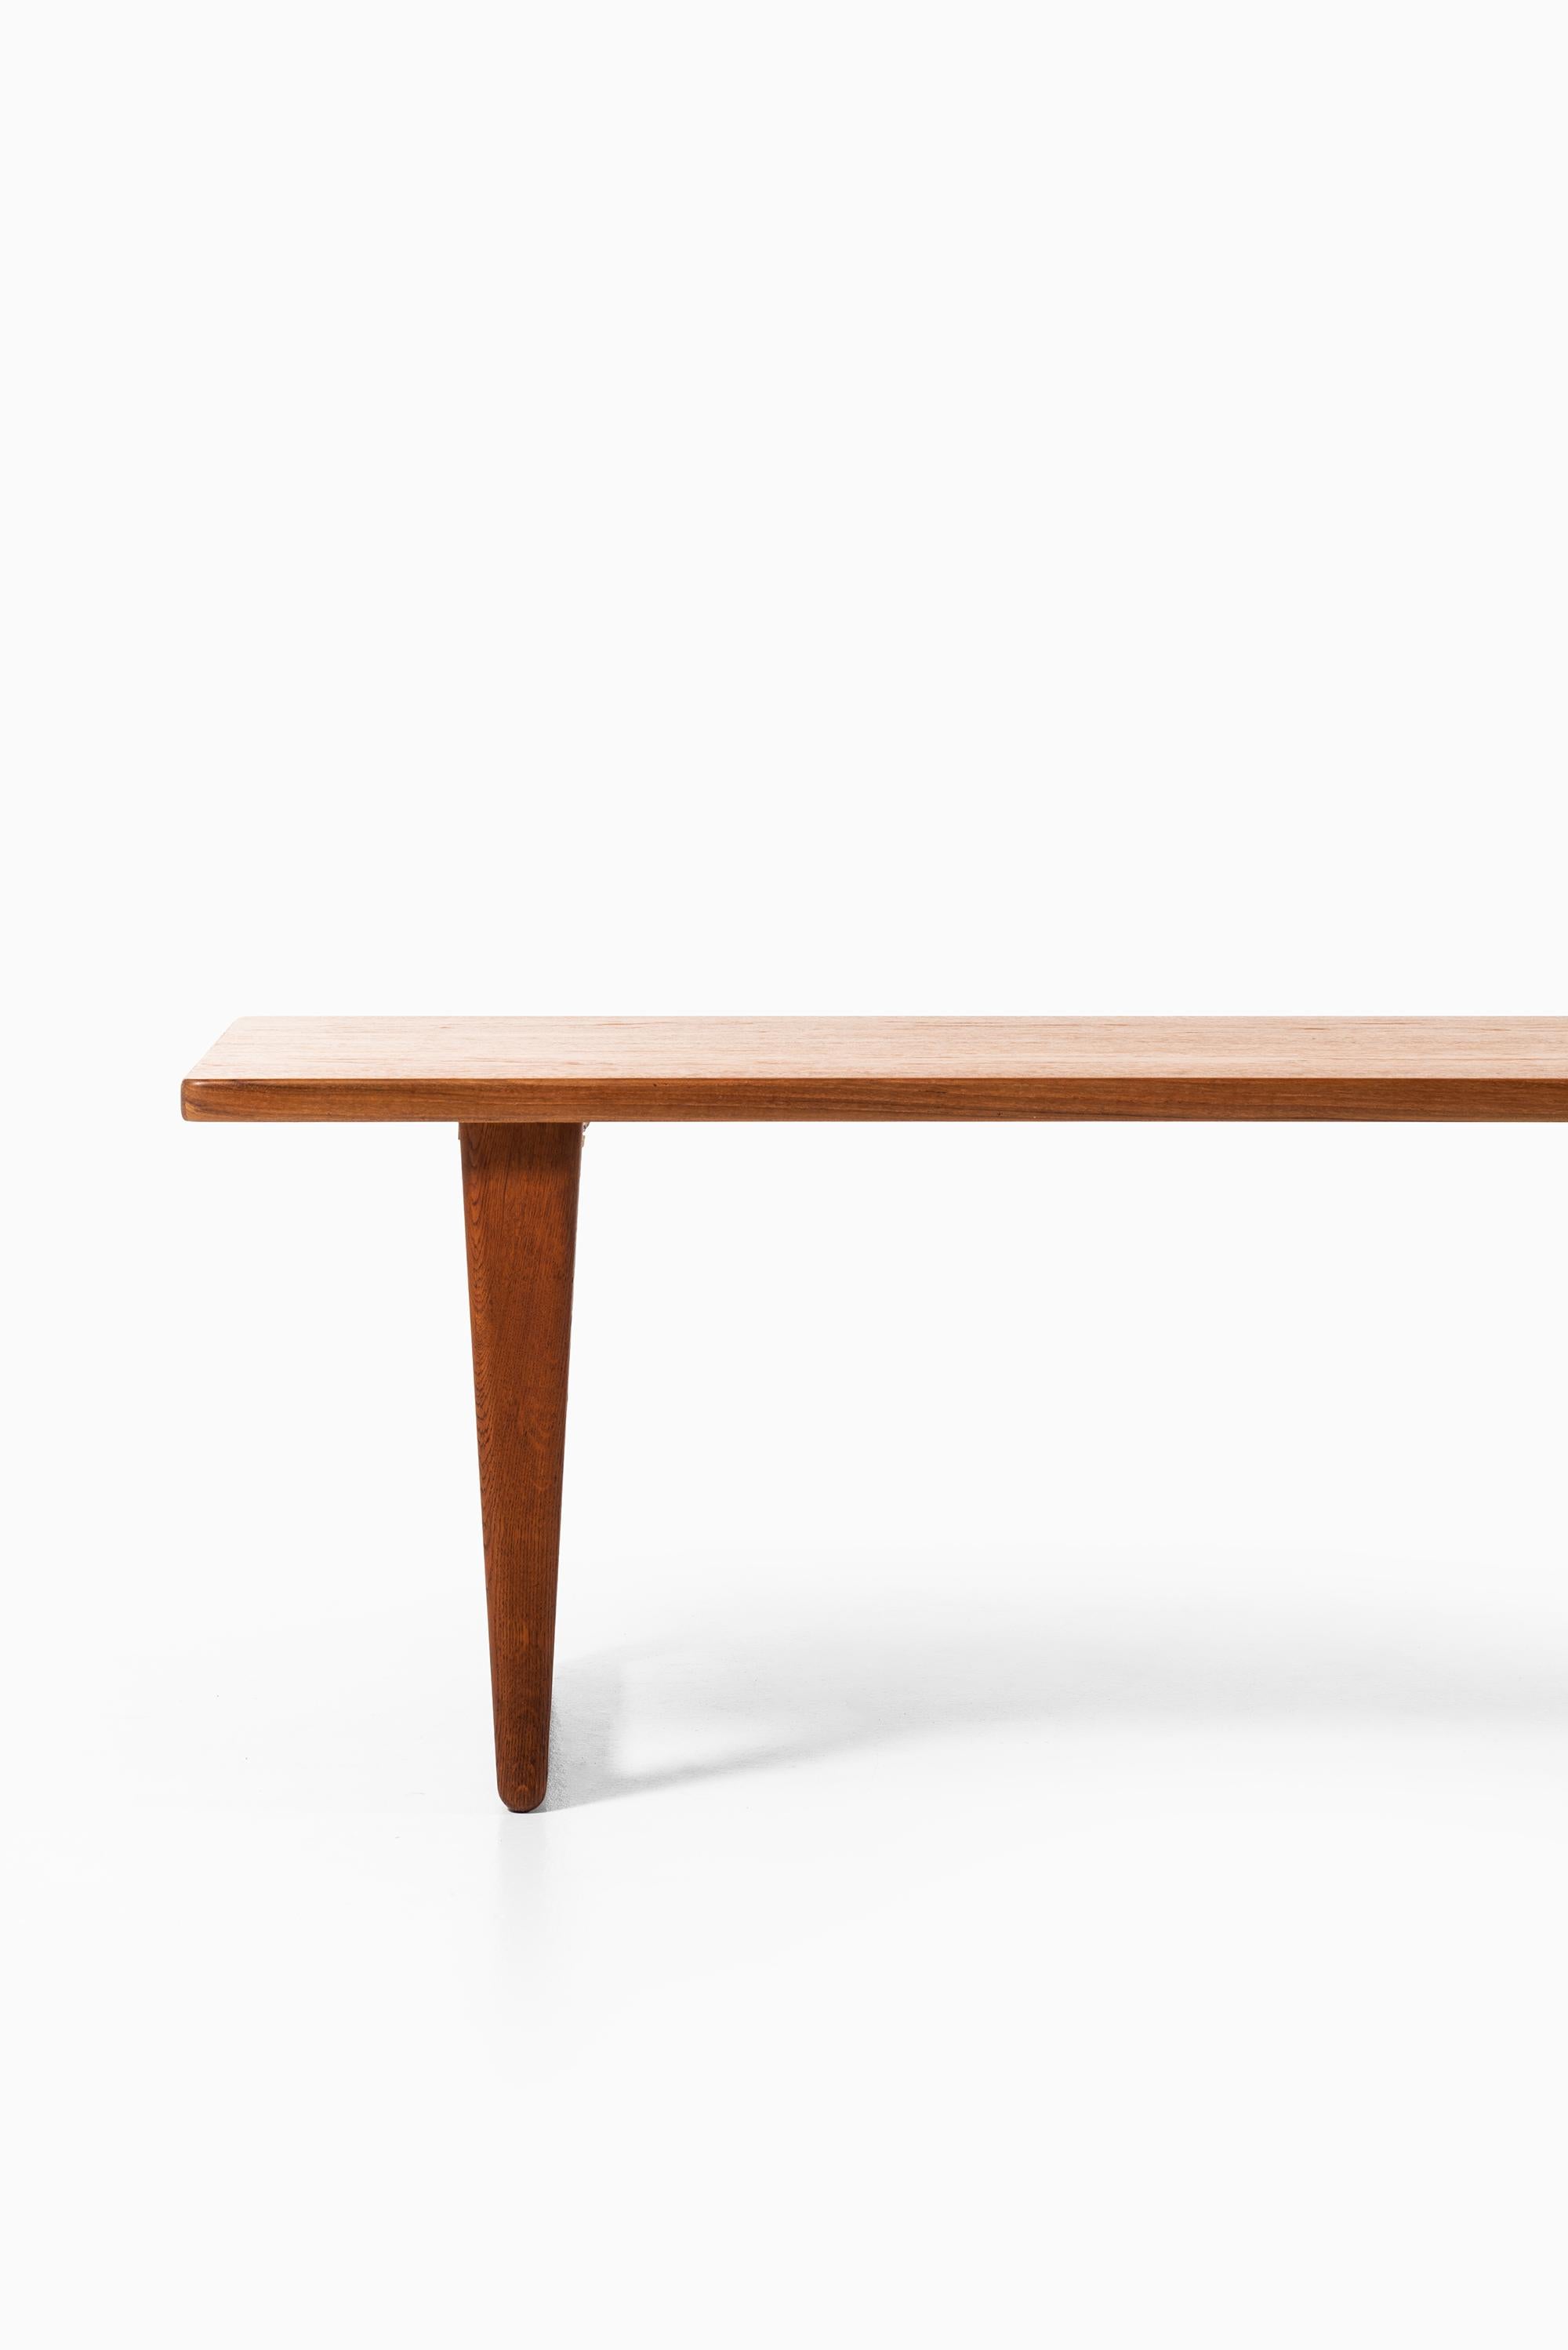 Coffee table / side table model 261 by Børge Mogensen. Produced by DR Møbler in Denmark.